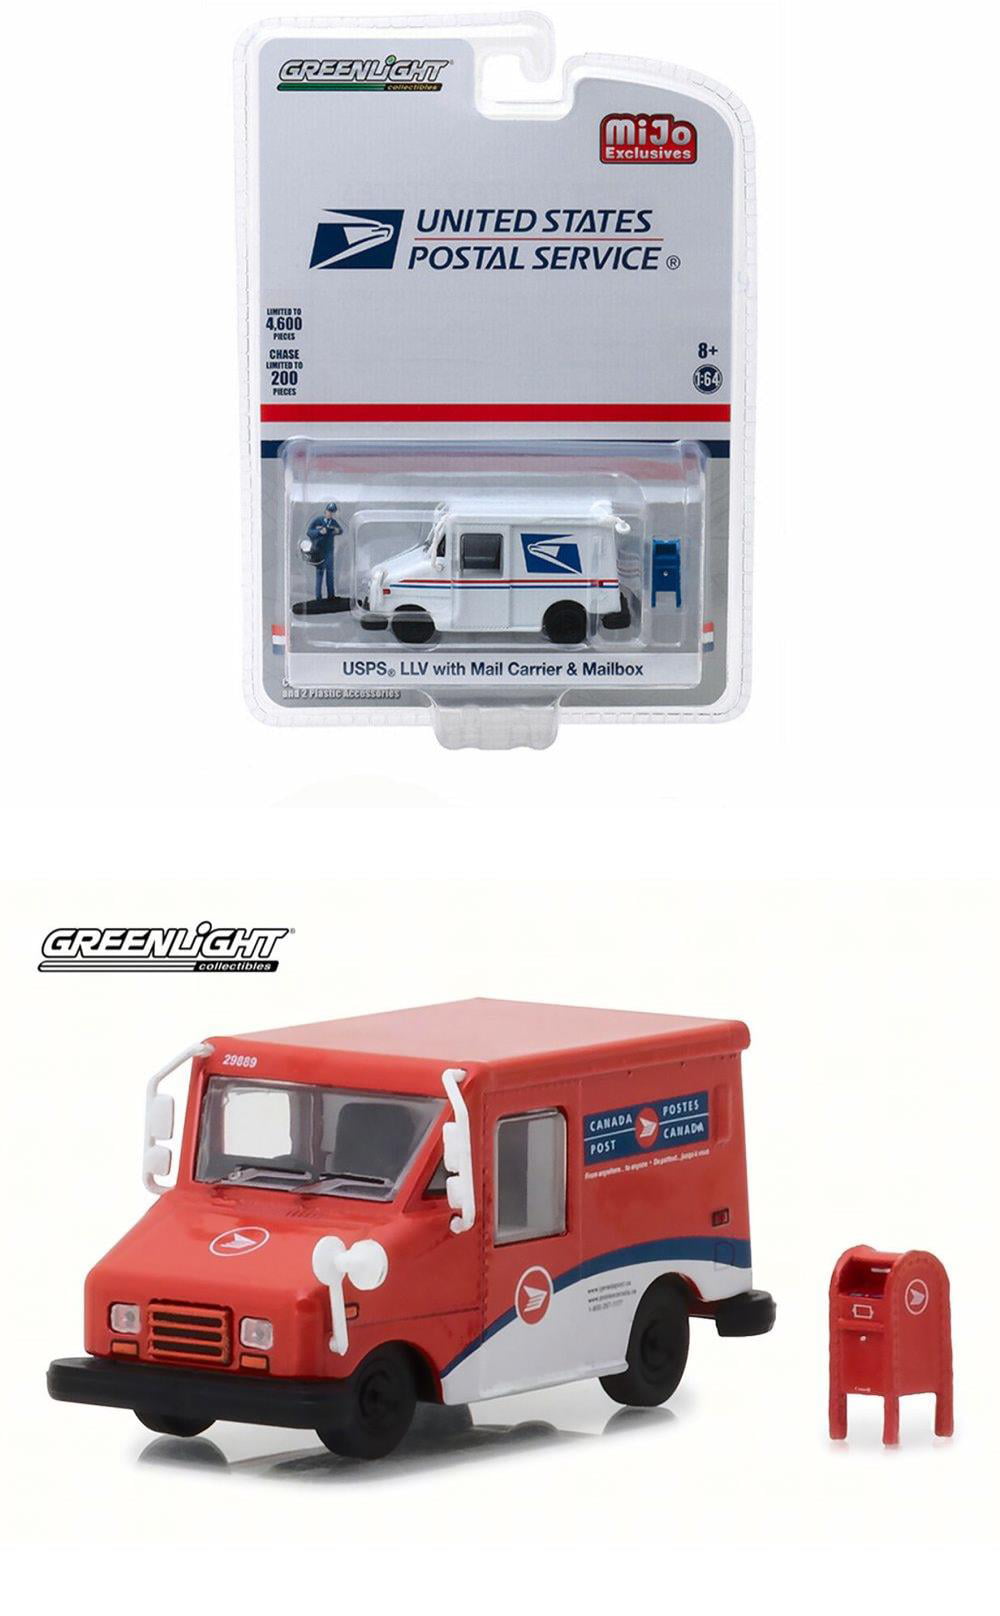 GREENLIGHT 1:64 CANADA POST LONG-LIFE POSTAL DELIVERY VEHICLE W/ MAILBOX 29889